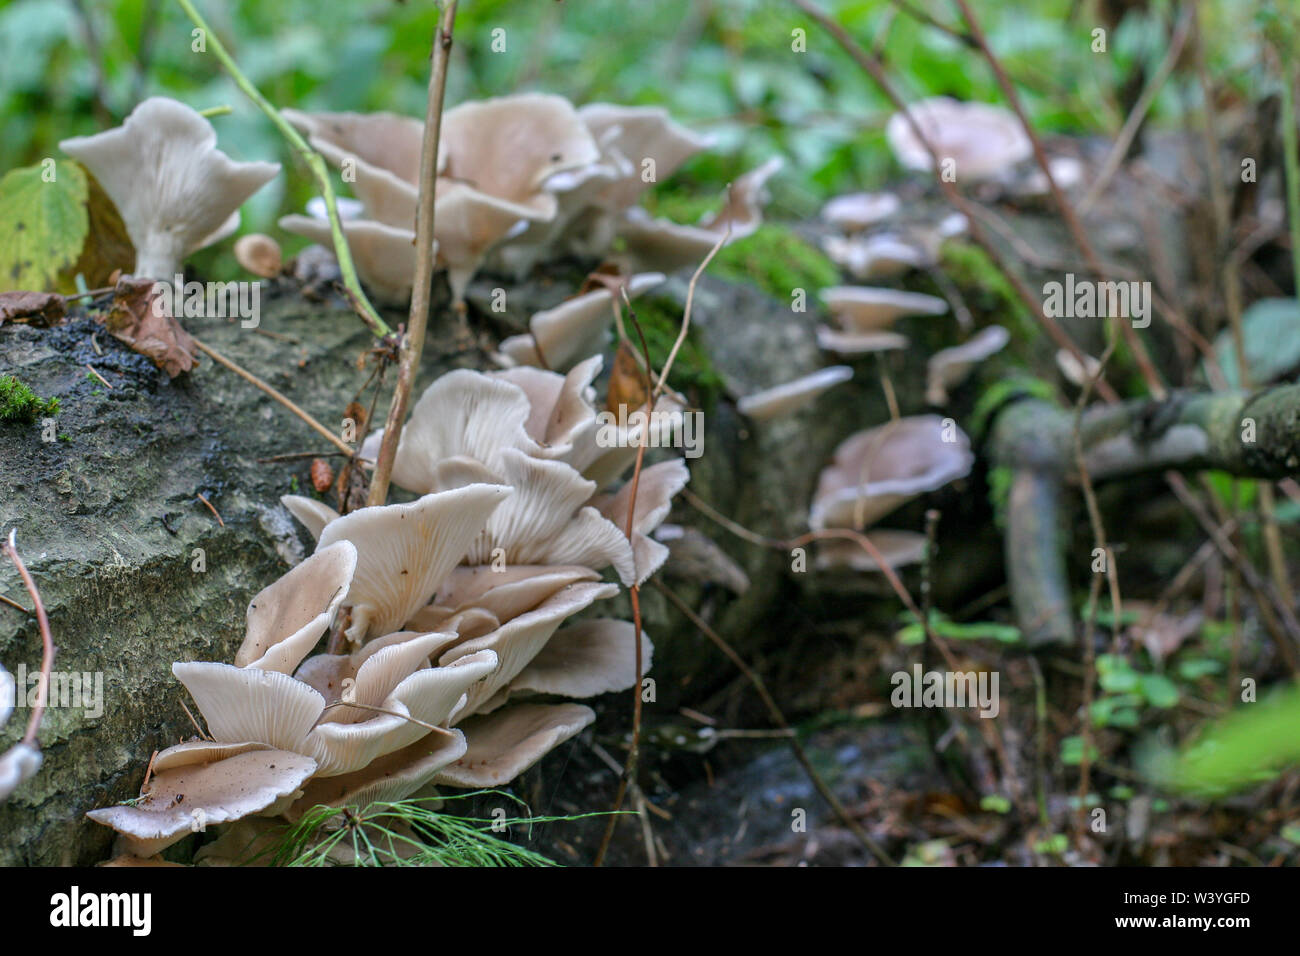 Lying tree overgrown with clusters of mushrooms. Light brown mushrooms. Focus on front mushrooms. Blurred background. Stock Photo